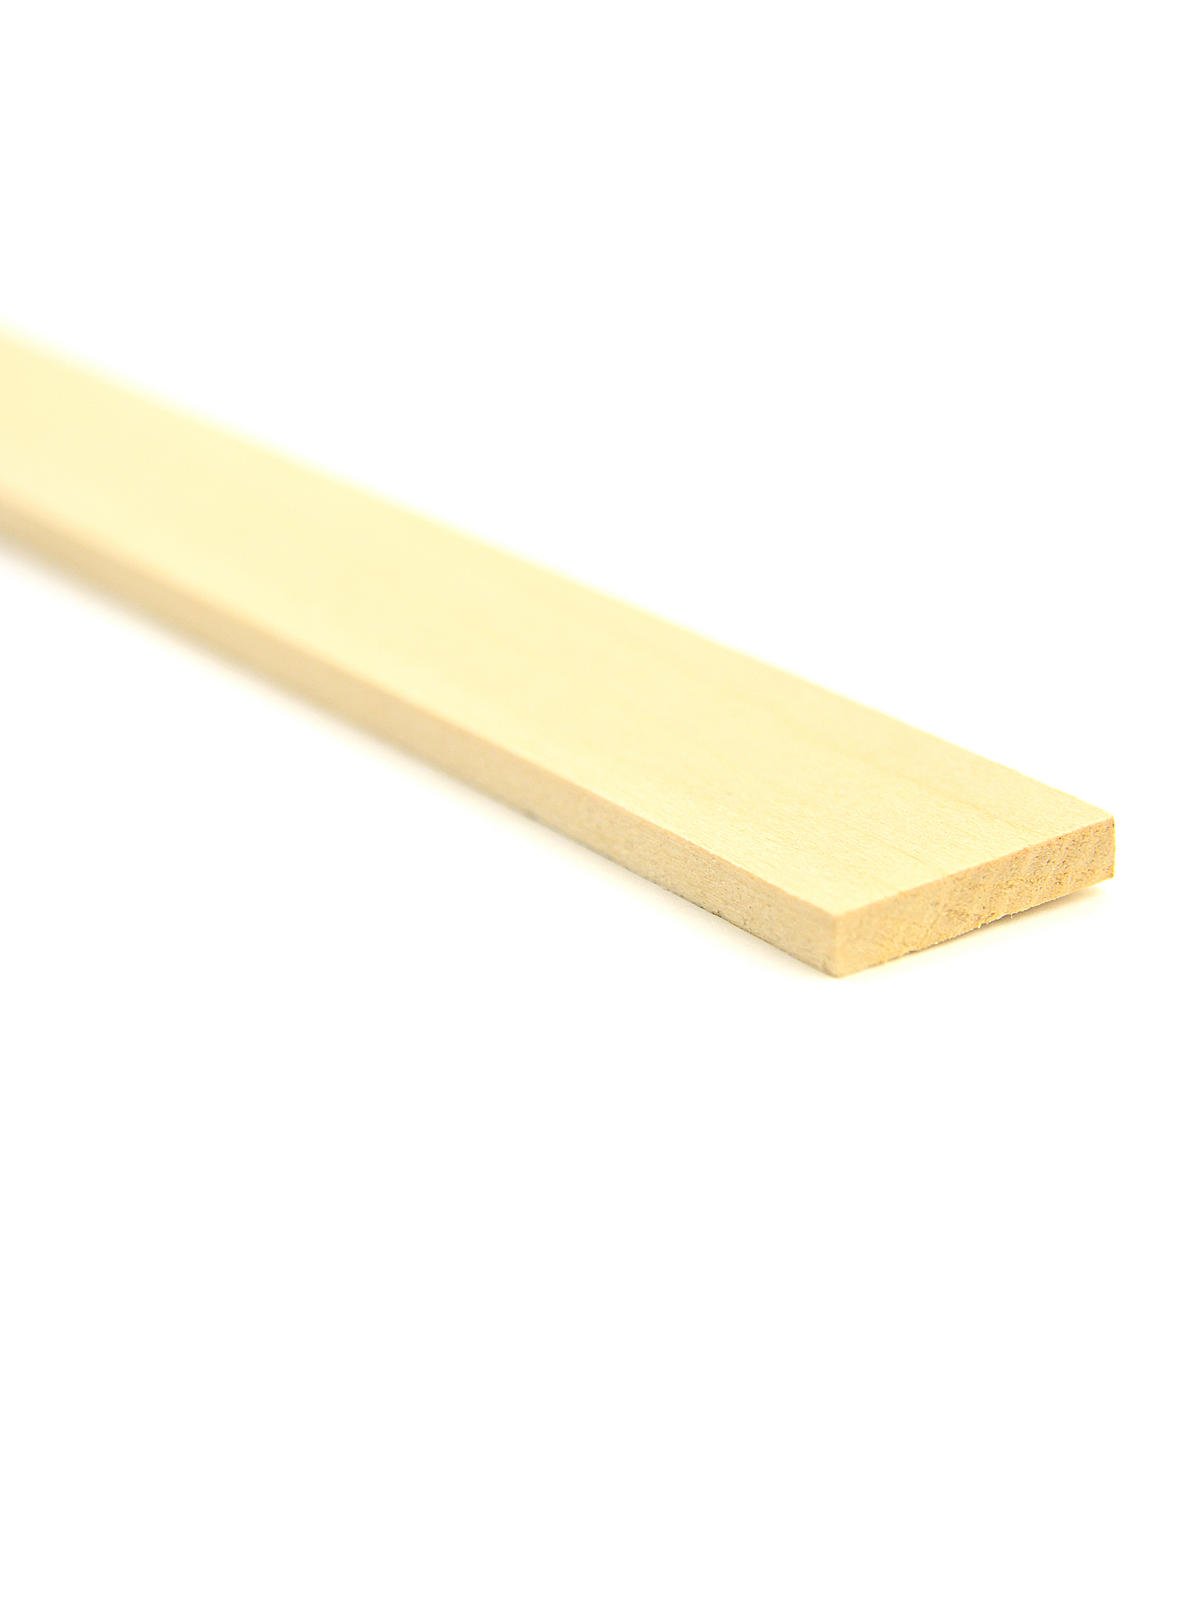 Midwest Products 1/16 in. x 1/16 in. x 2 ft. Basswood Wood Project